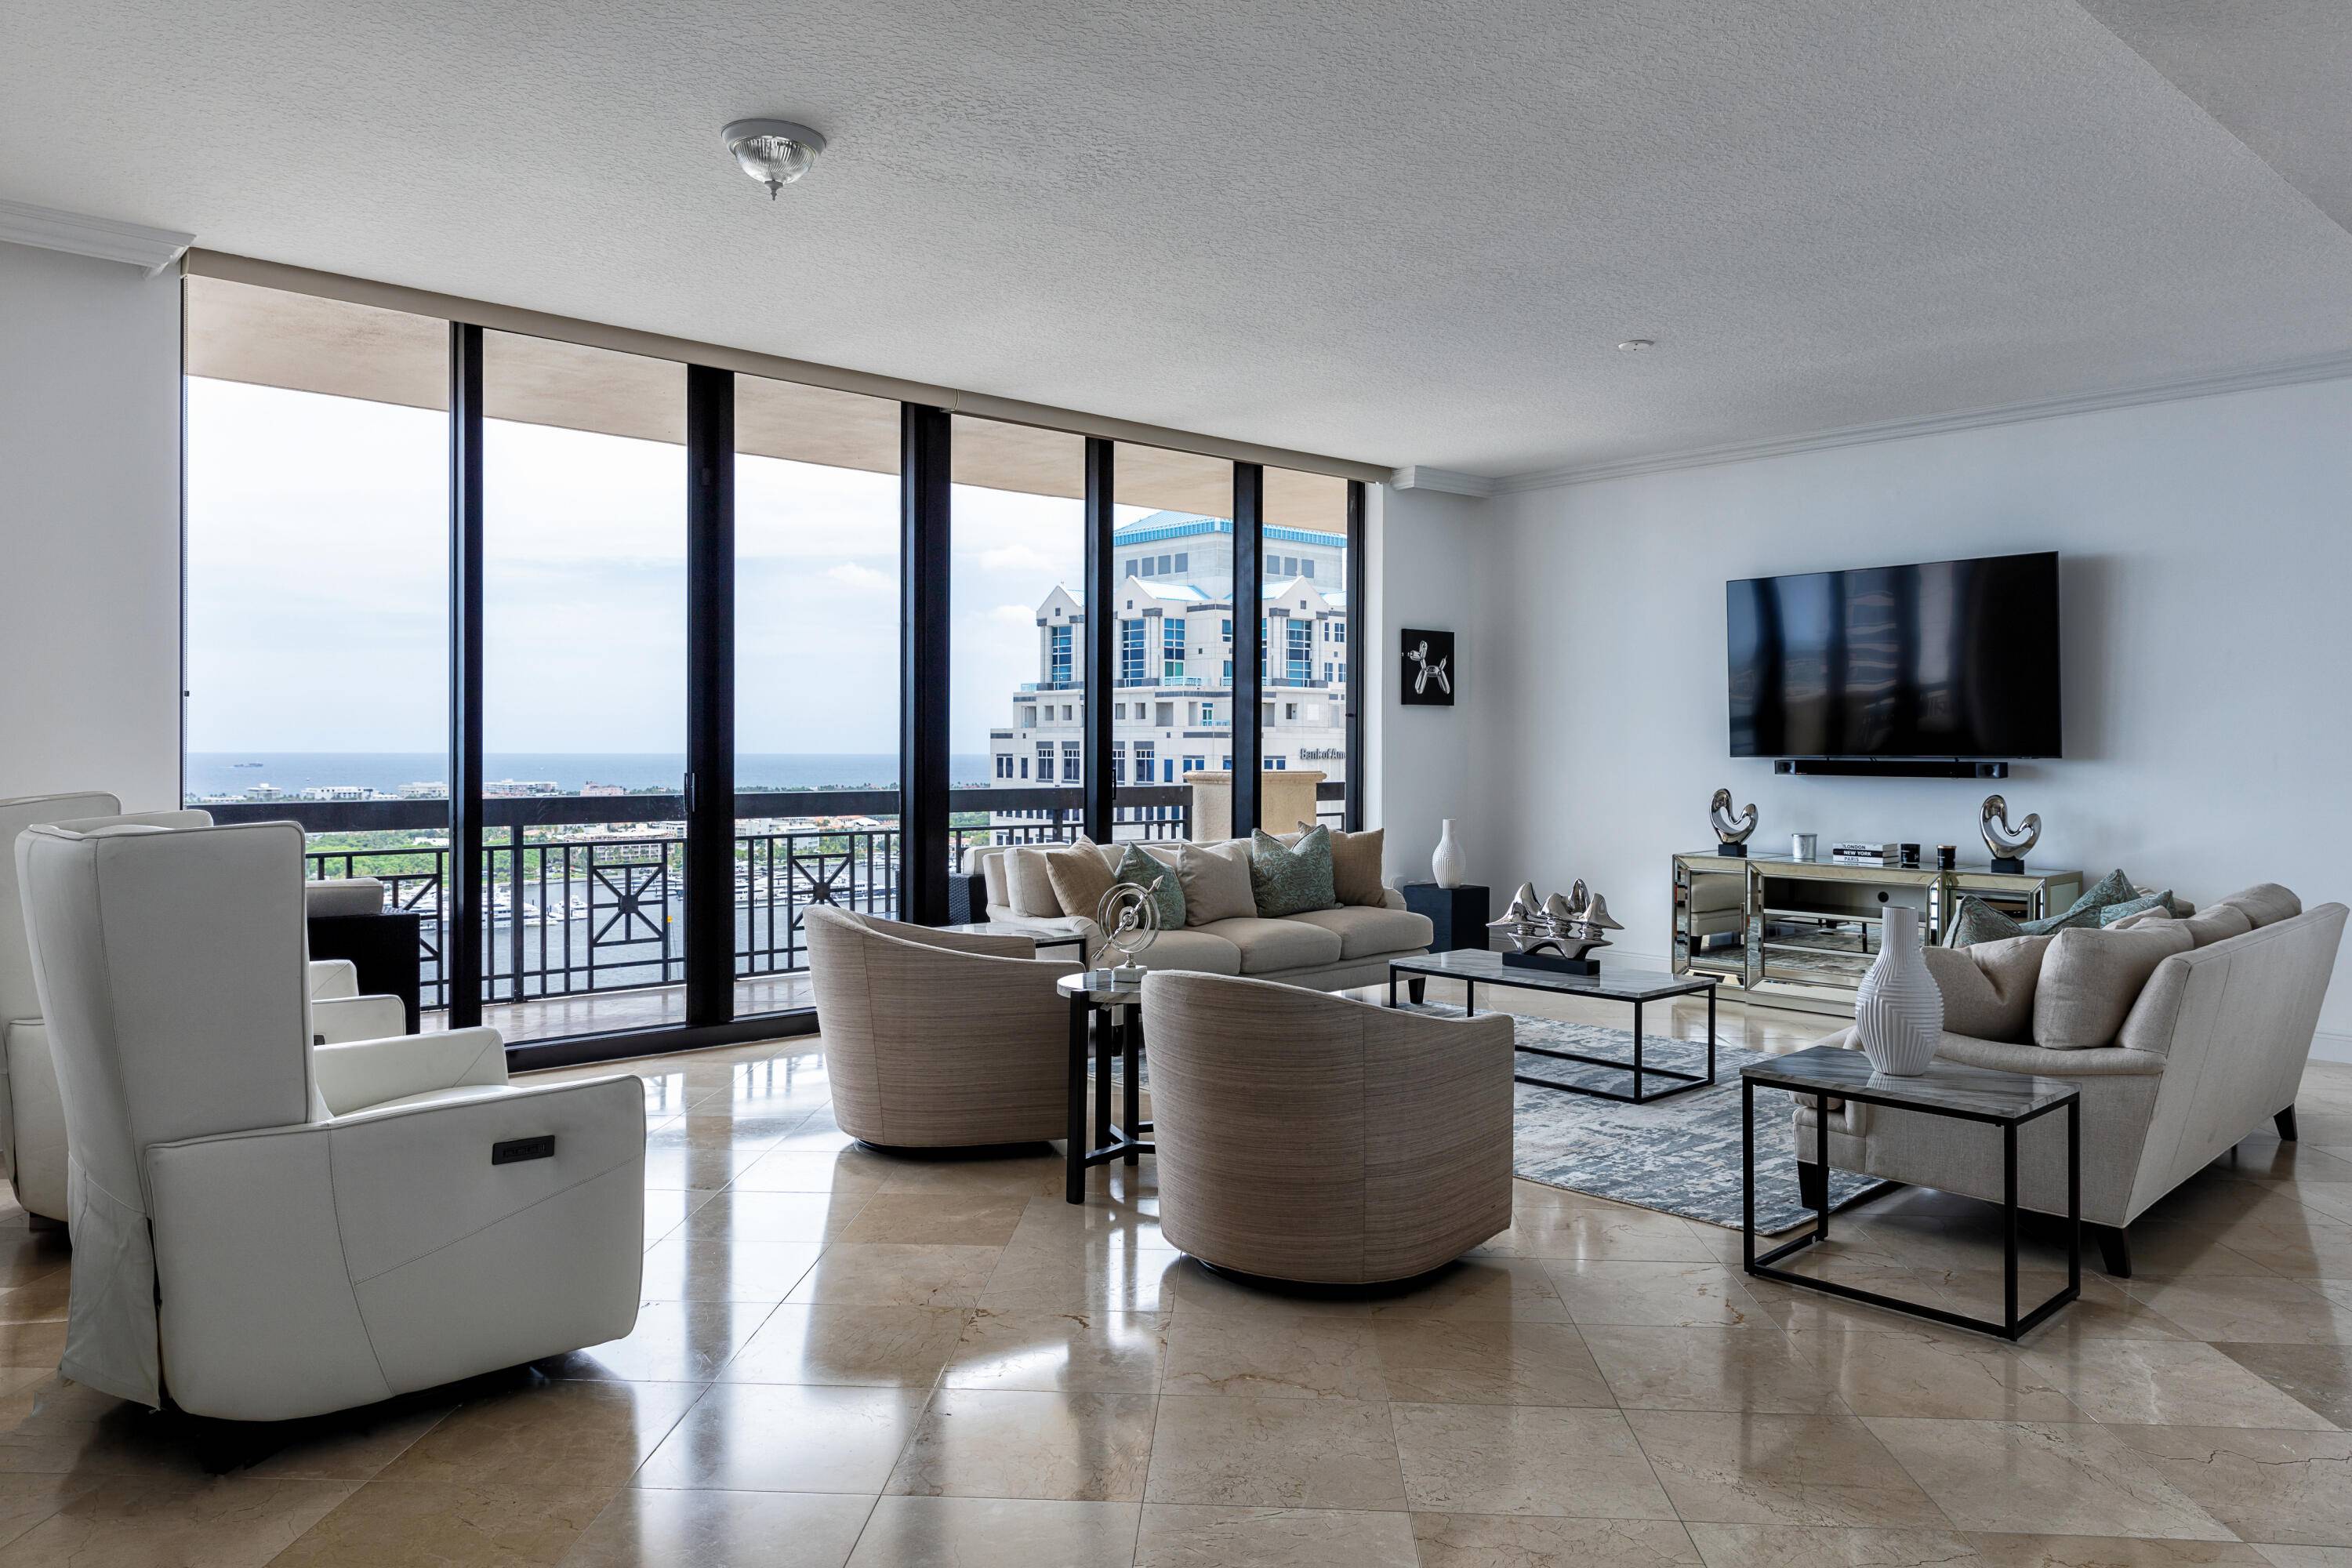 Available for seasonal rental, you'll experience spectacular Intracoastal and ocean views with direct balcony access from each of the unit's major spaces for direct views of Palm Beach Island.